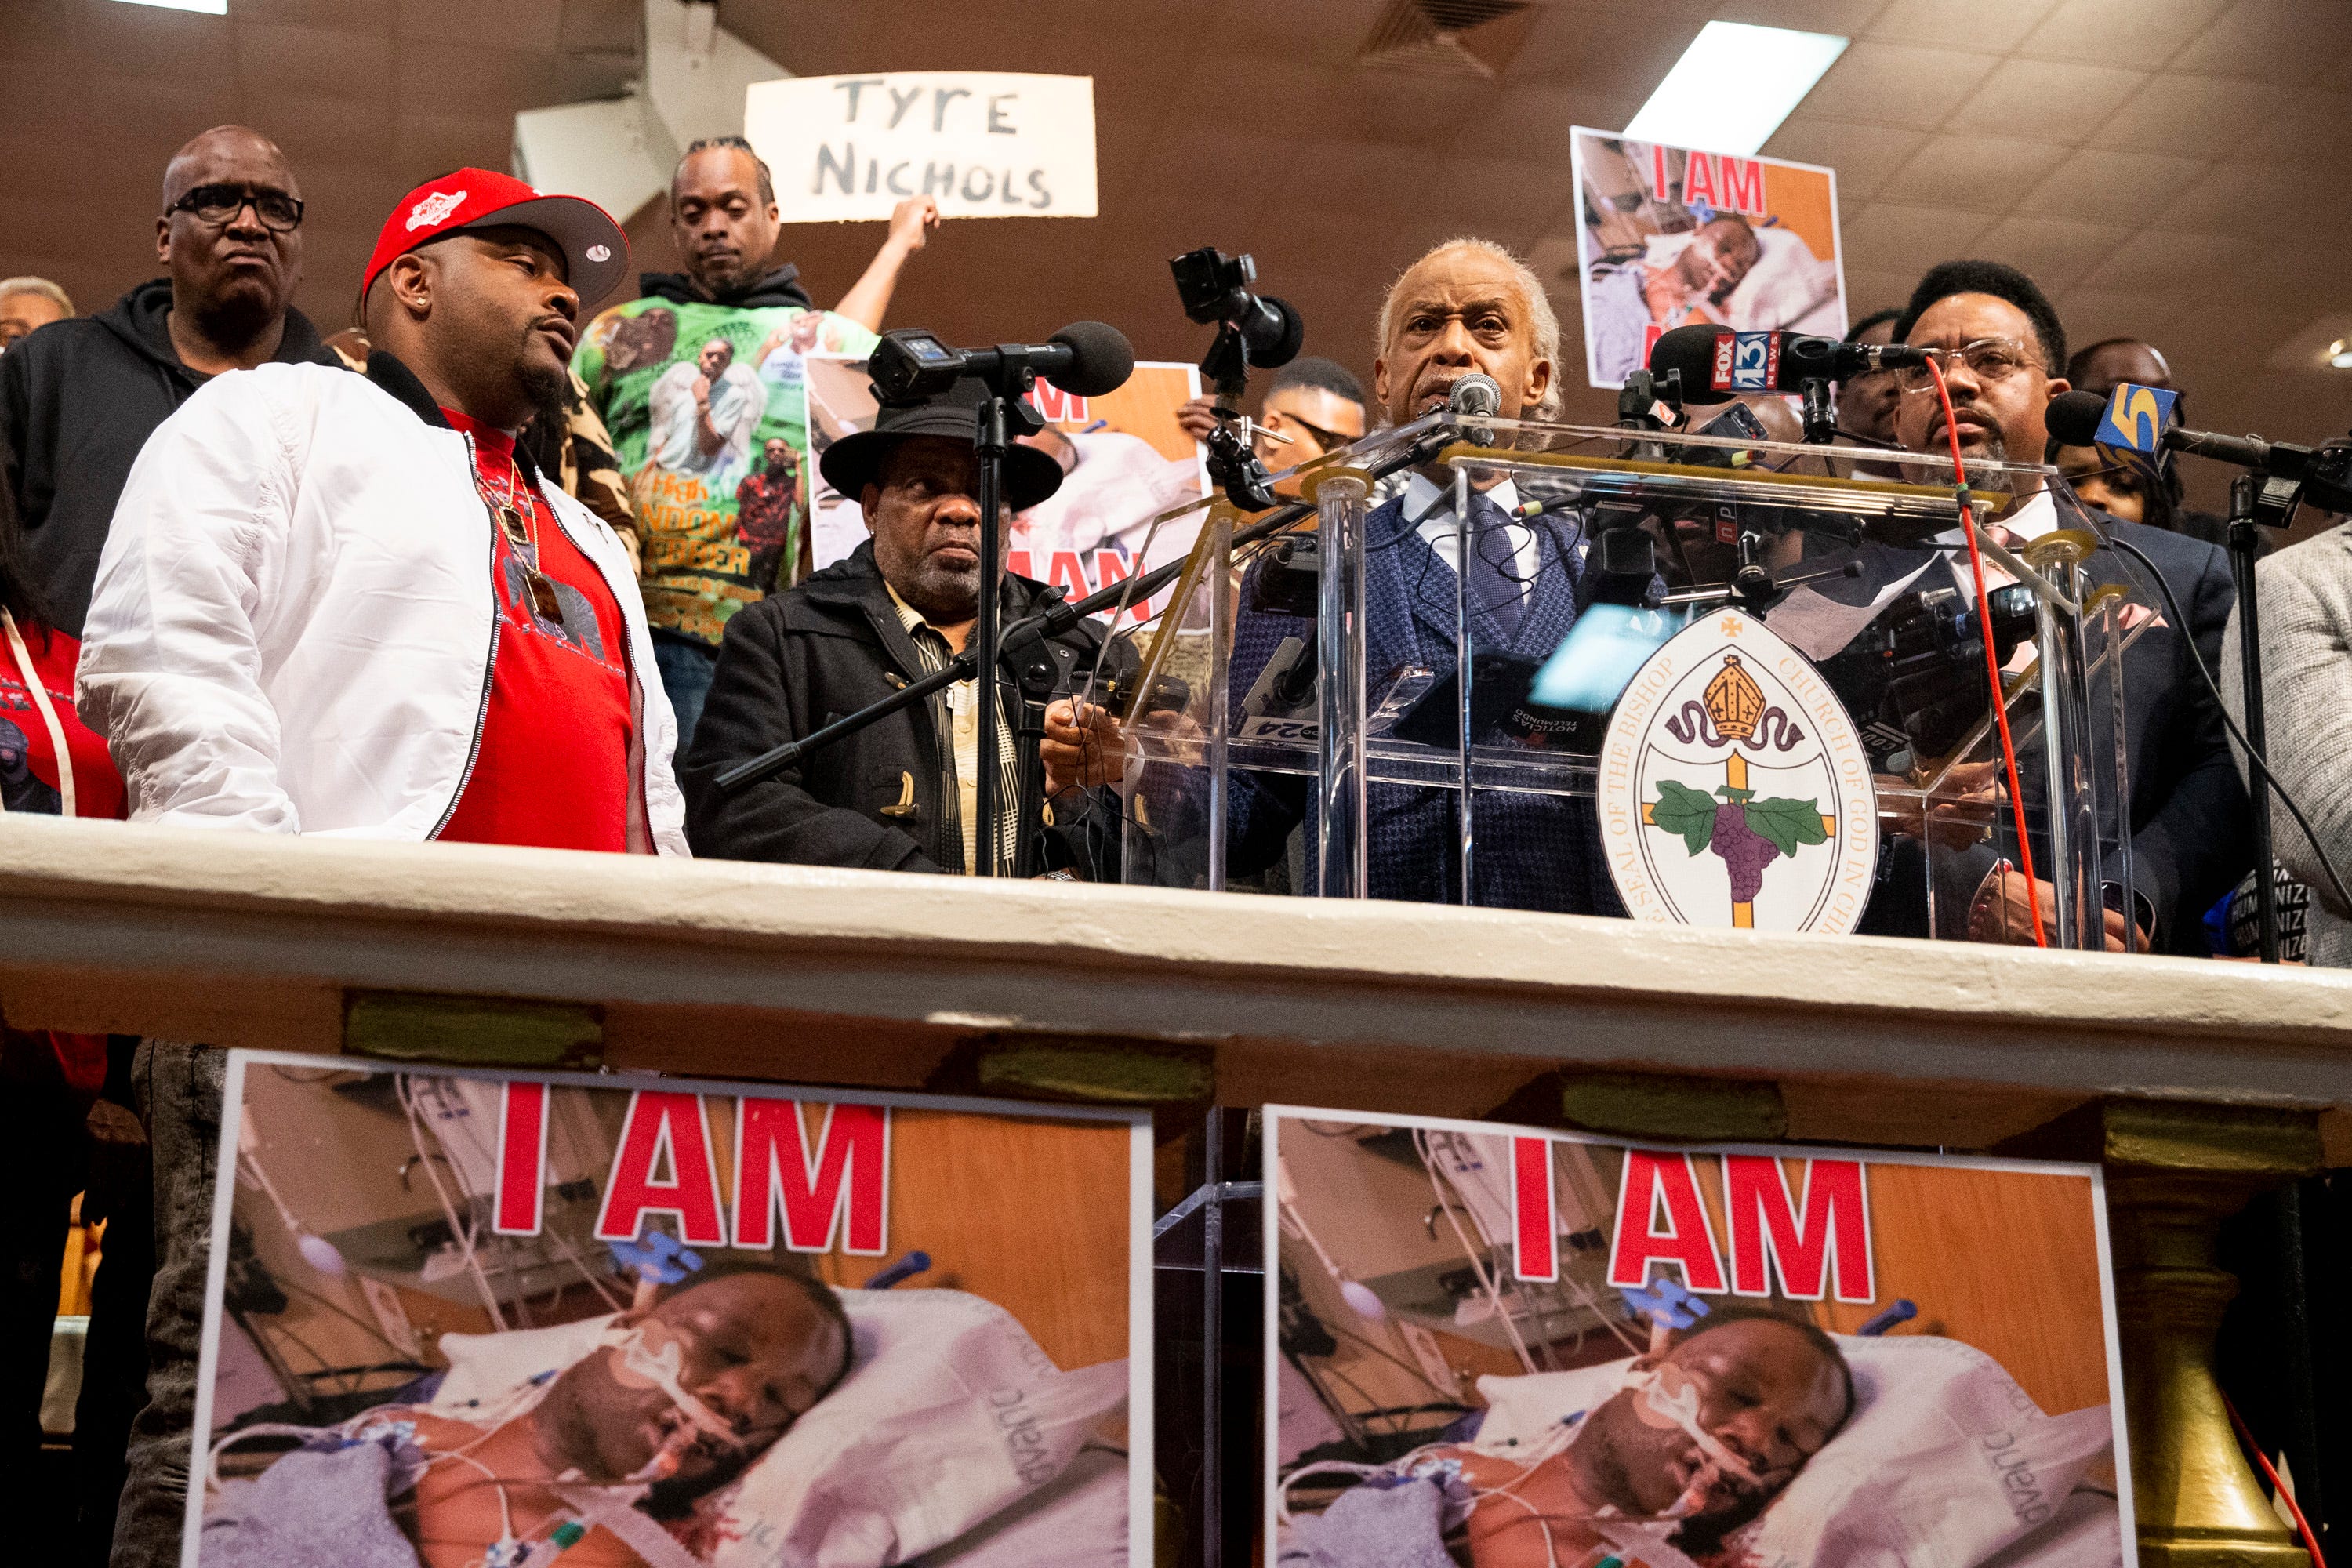 Rev. Al Sharpton holds press conference with Tyre Nichols' family, invokes Martin Luther King's 'Mountaintop' speech